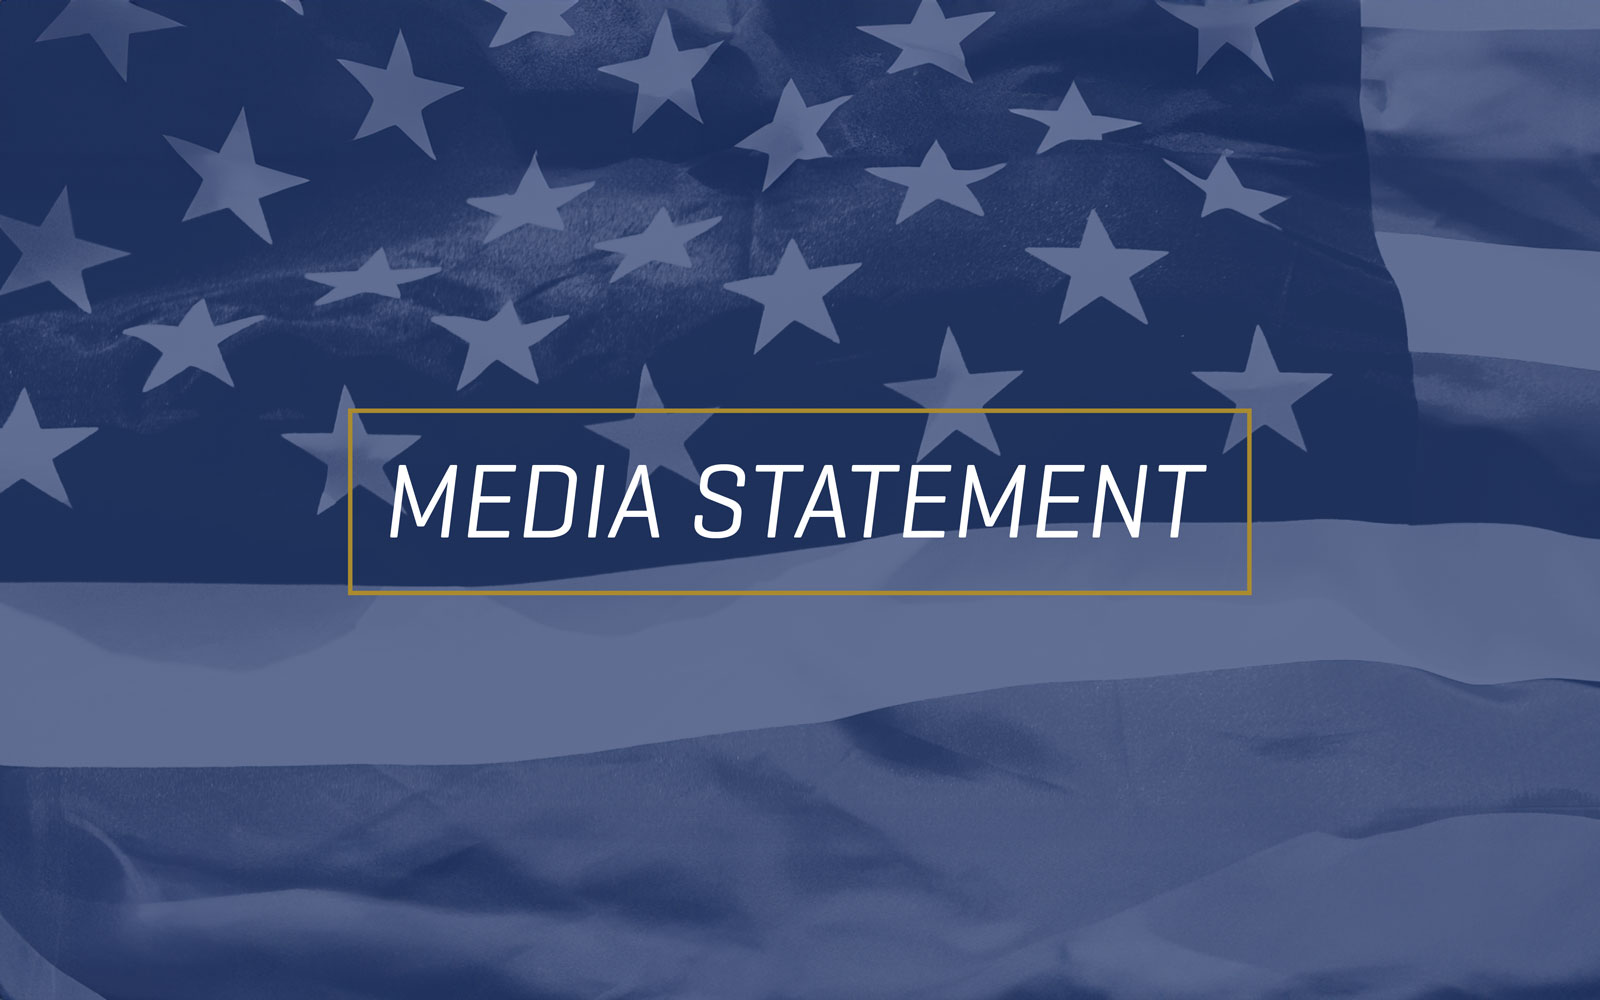 Media statement default image with the American flag in the background